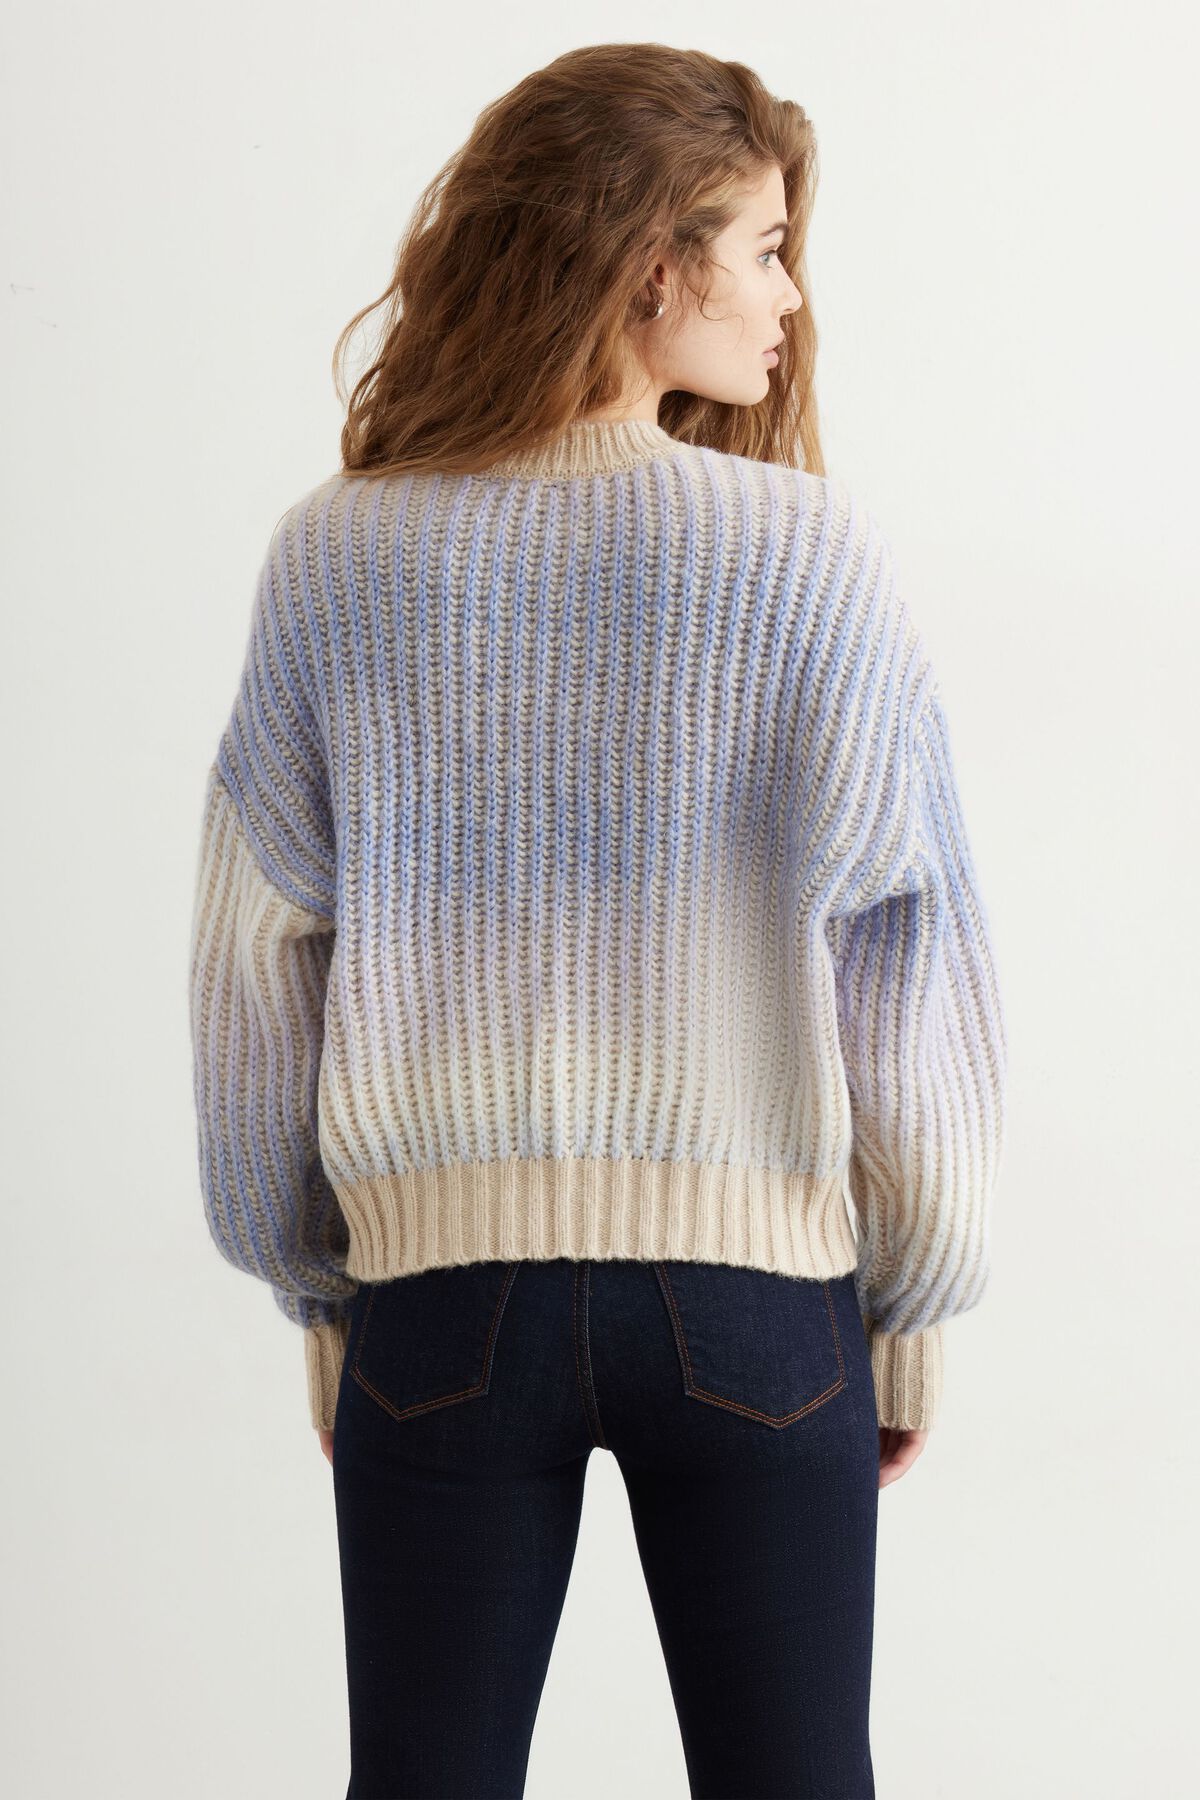 Dynamite Textured Ombre Sweater. 3